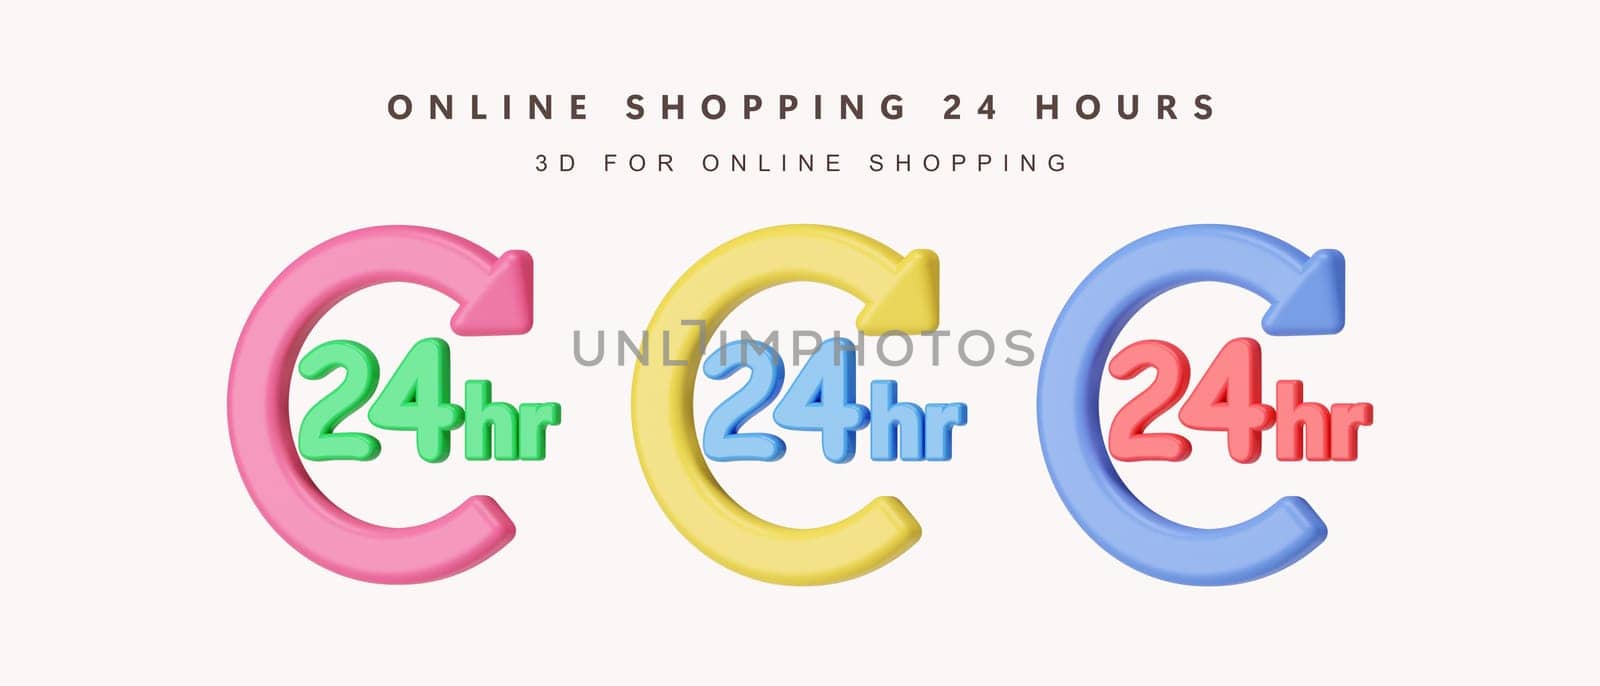 3d Set of online shopping 24 hours for shopping online concept. icon isolated on white background. 3d rendering illustration. Clipping path. by meepiangraphic